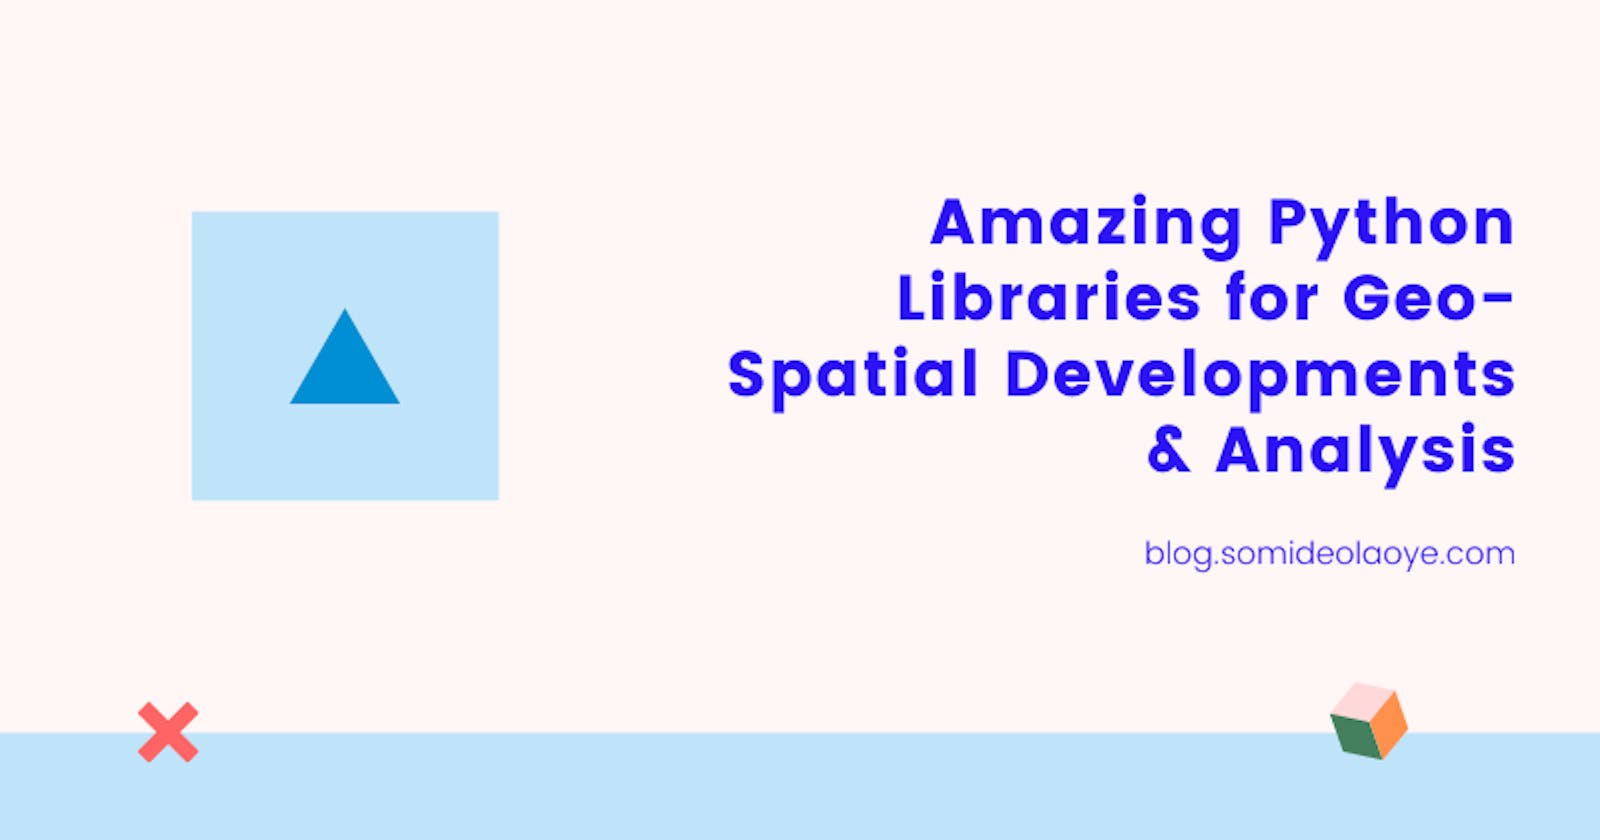 Amazing Python Libraries for Geo-Spatial Developments & Analysis